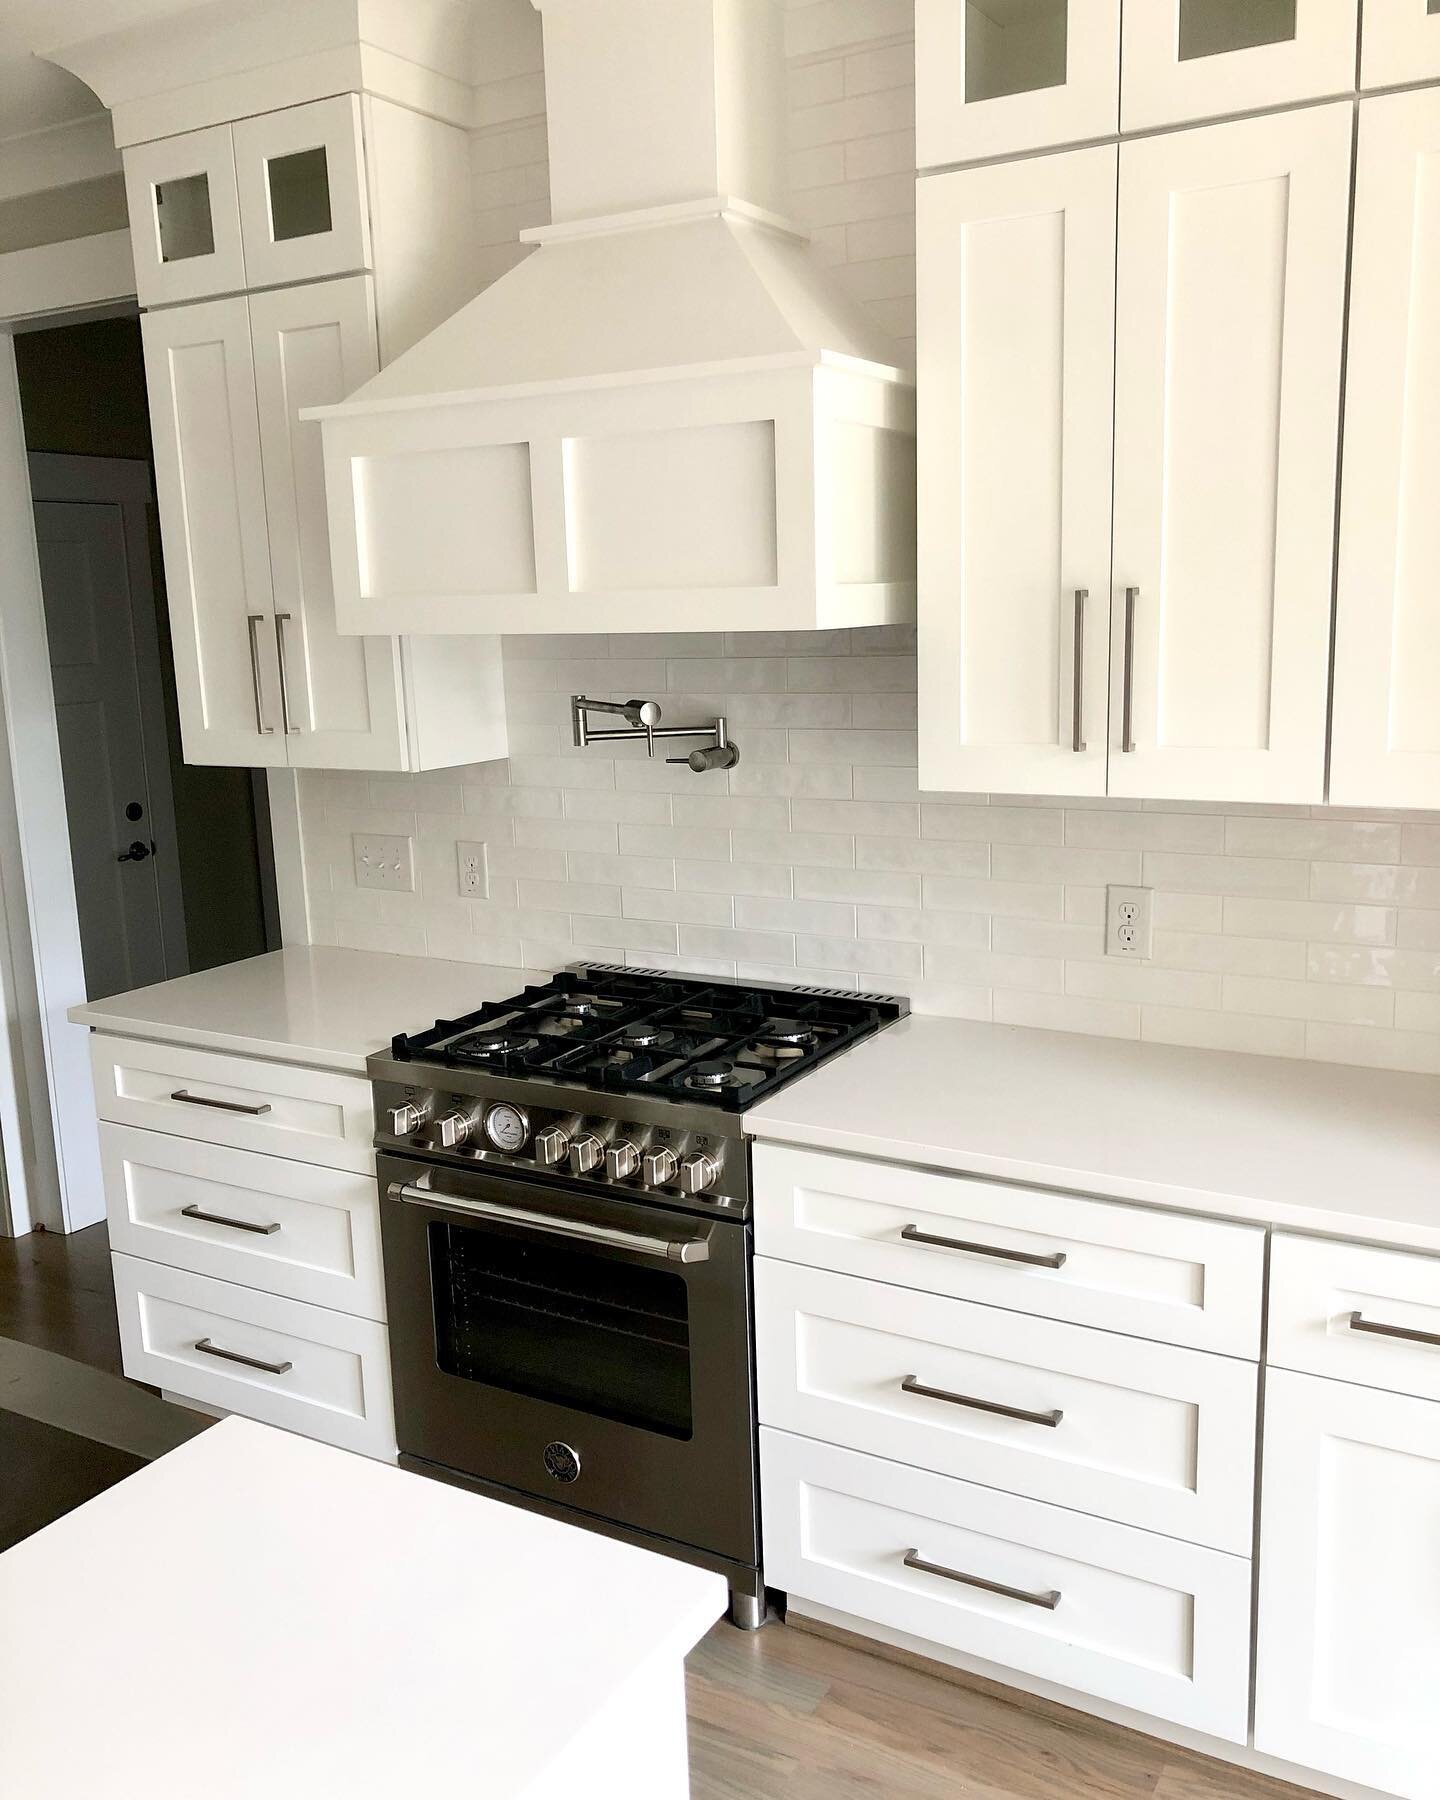 Heart of your home ❤️ Admiring this beautiful  white kitchen we completed in Wakefield Meadows. #whitekitchen 

Follow us ➡️ @oconnelldeveloping
www.oconnelldeveloping.com

#customhome #customhomes #customhomebuilders #custombuilder #custombuilders #